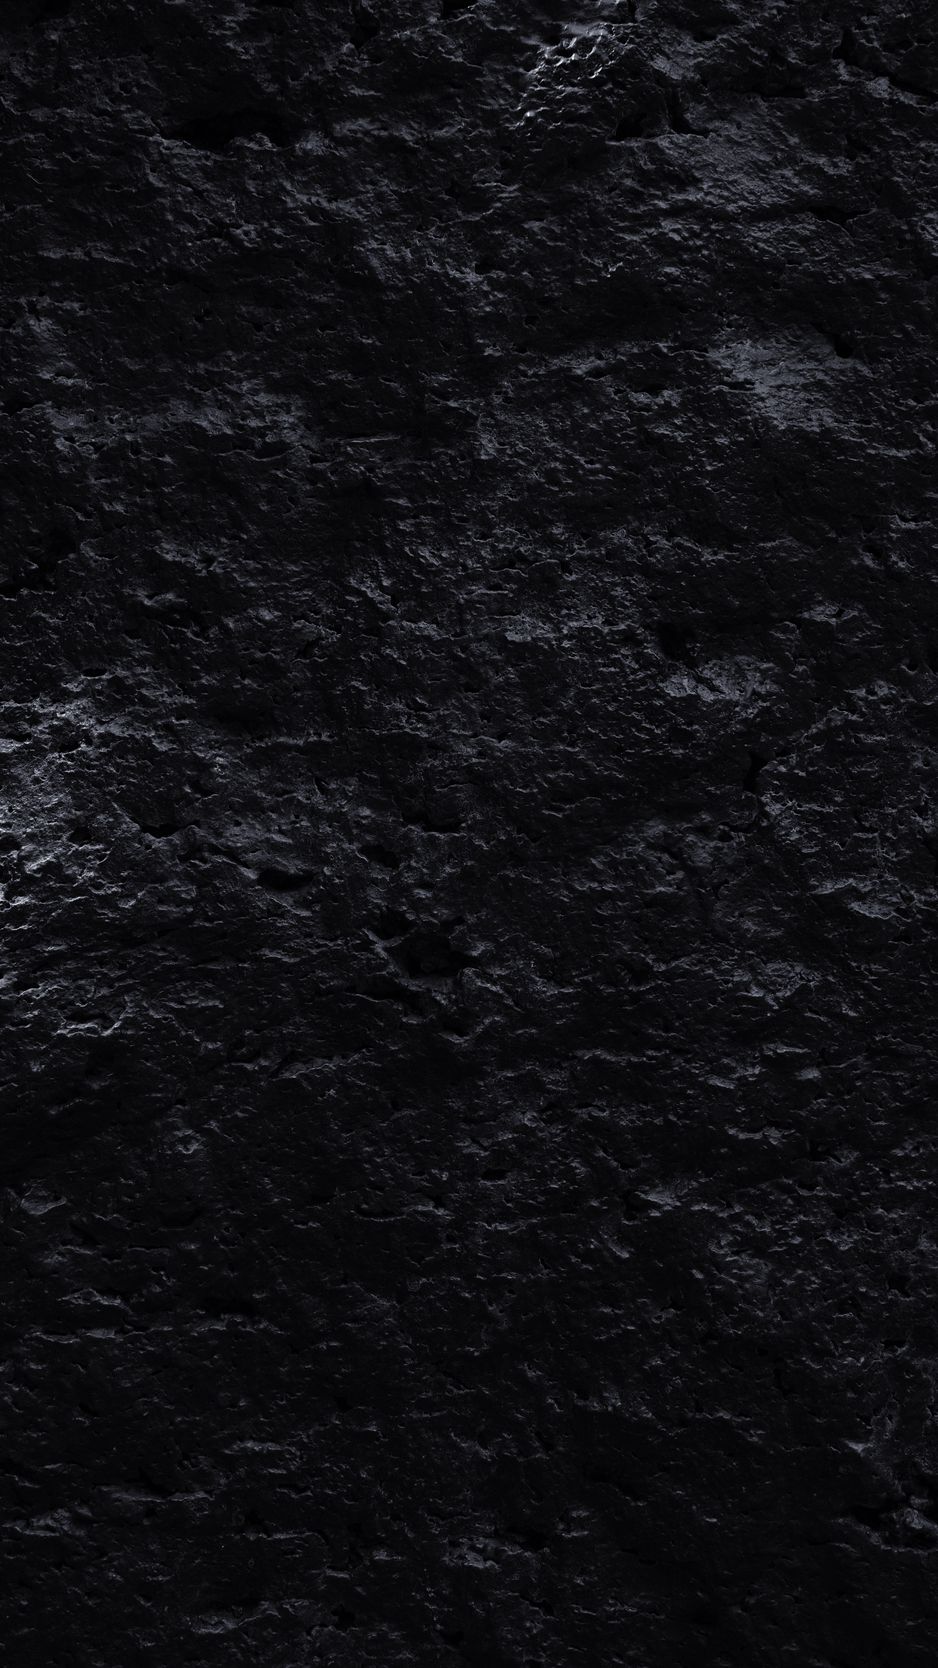 Download wallpaper 938x1668 texture, black, stone, surface iphone 8/7/6s/6  for parallax hd background